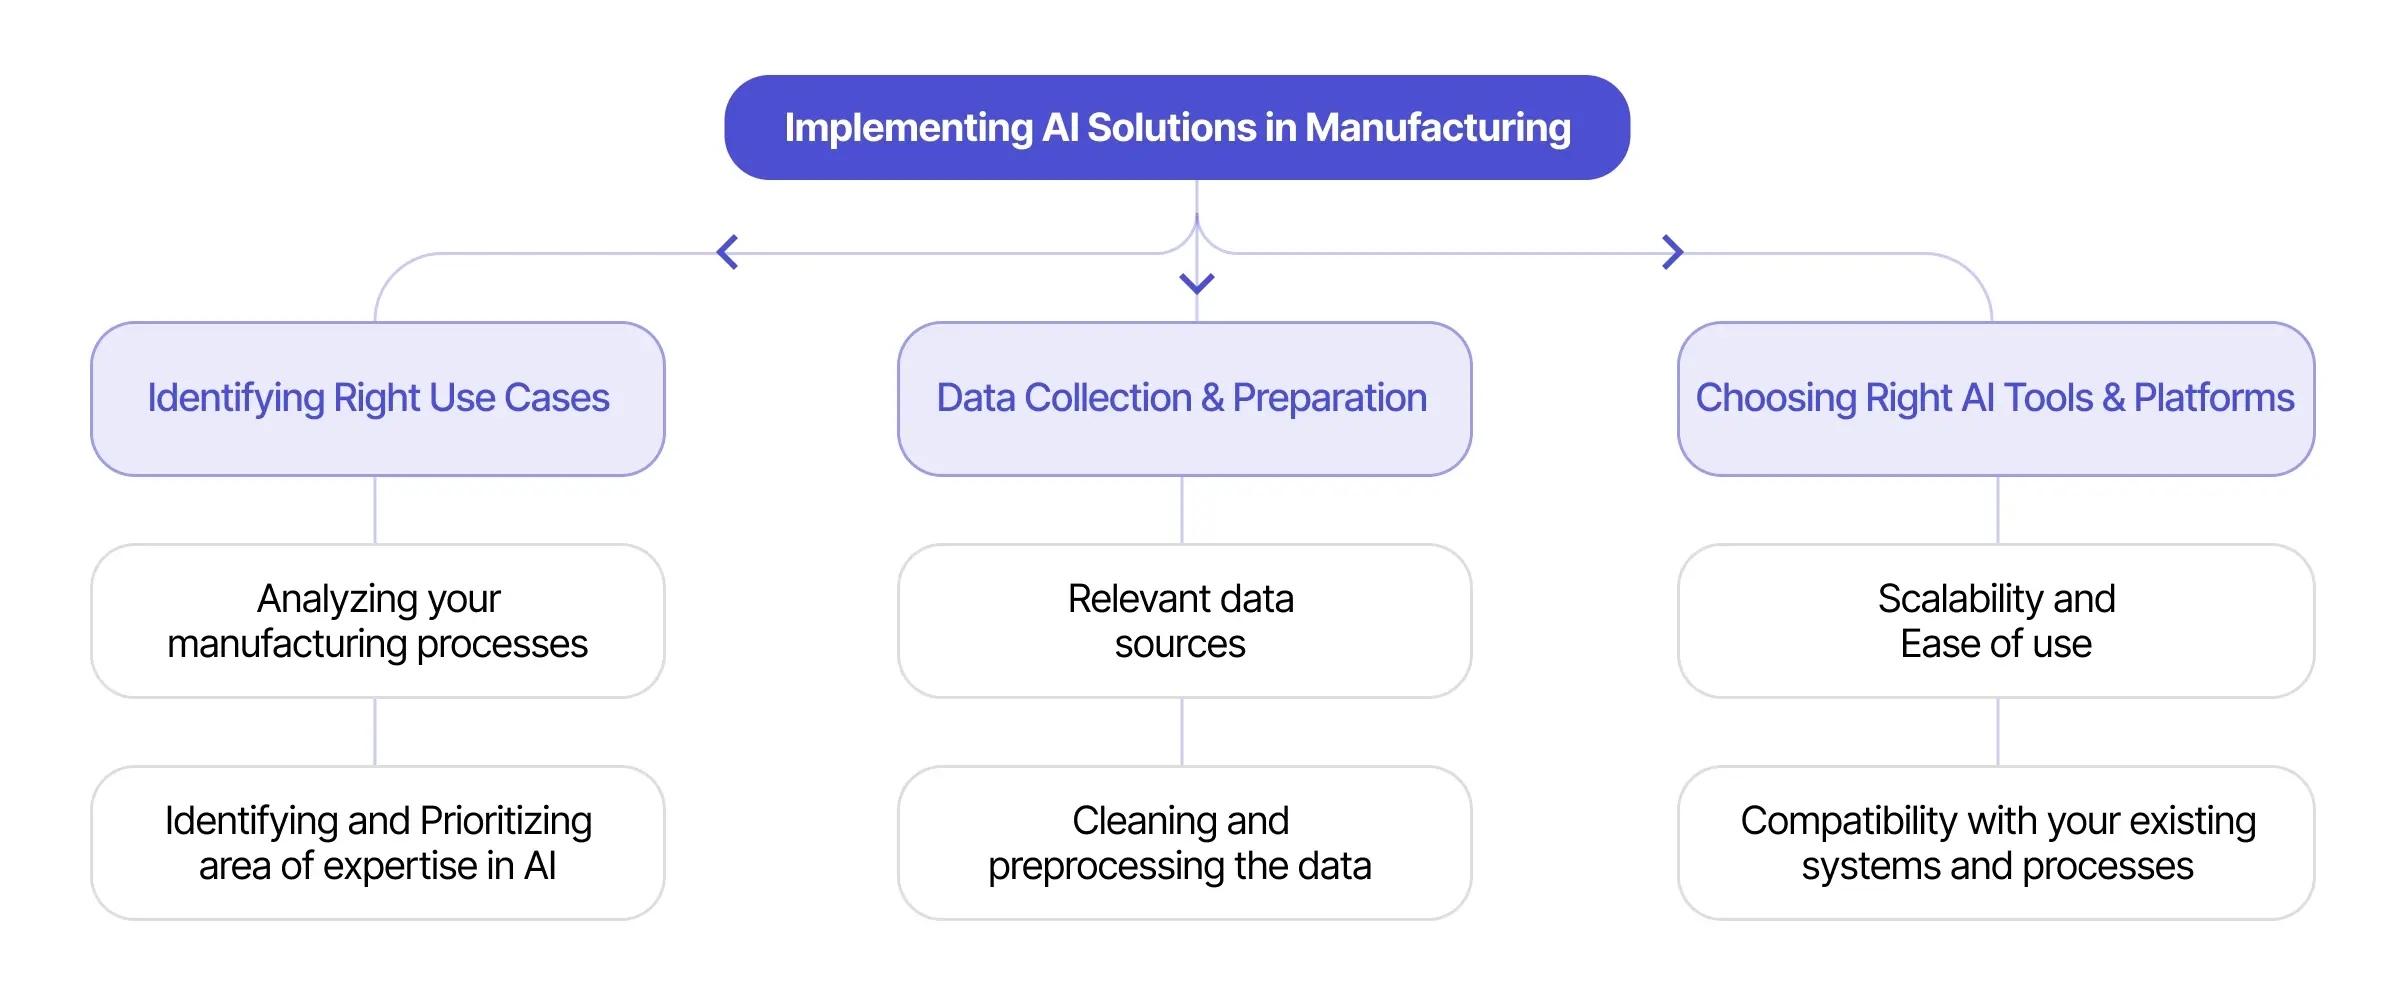 Implementing AI Solutions in Manufacturing